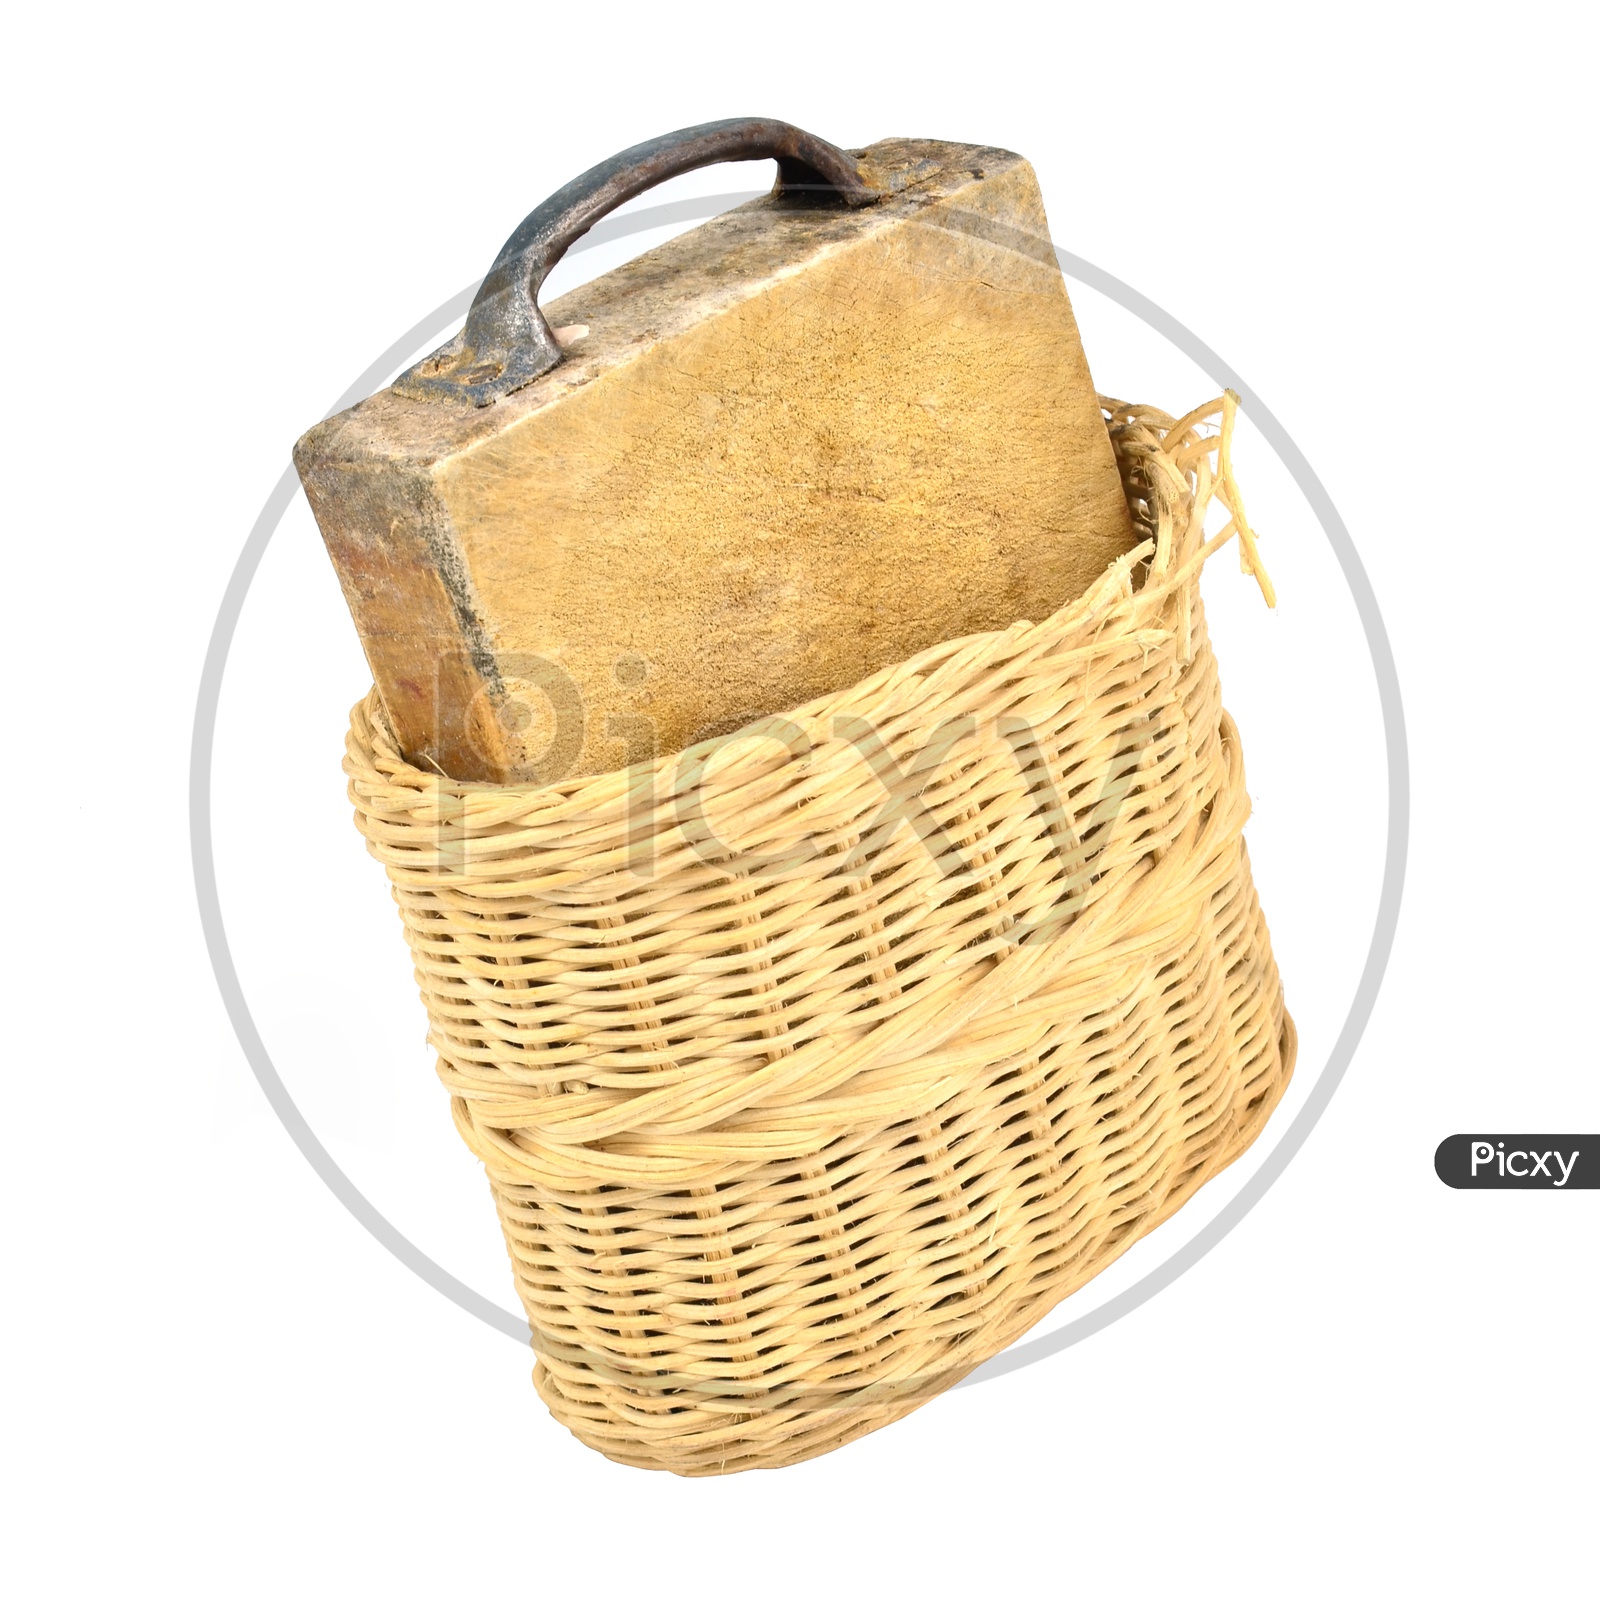 Wooden cutting board in a Wooden Weaved  basket On an isolated white background